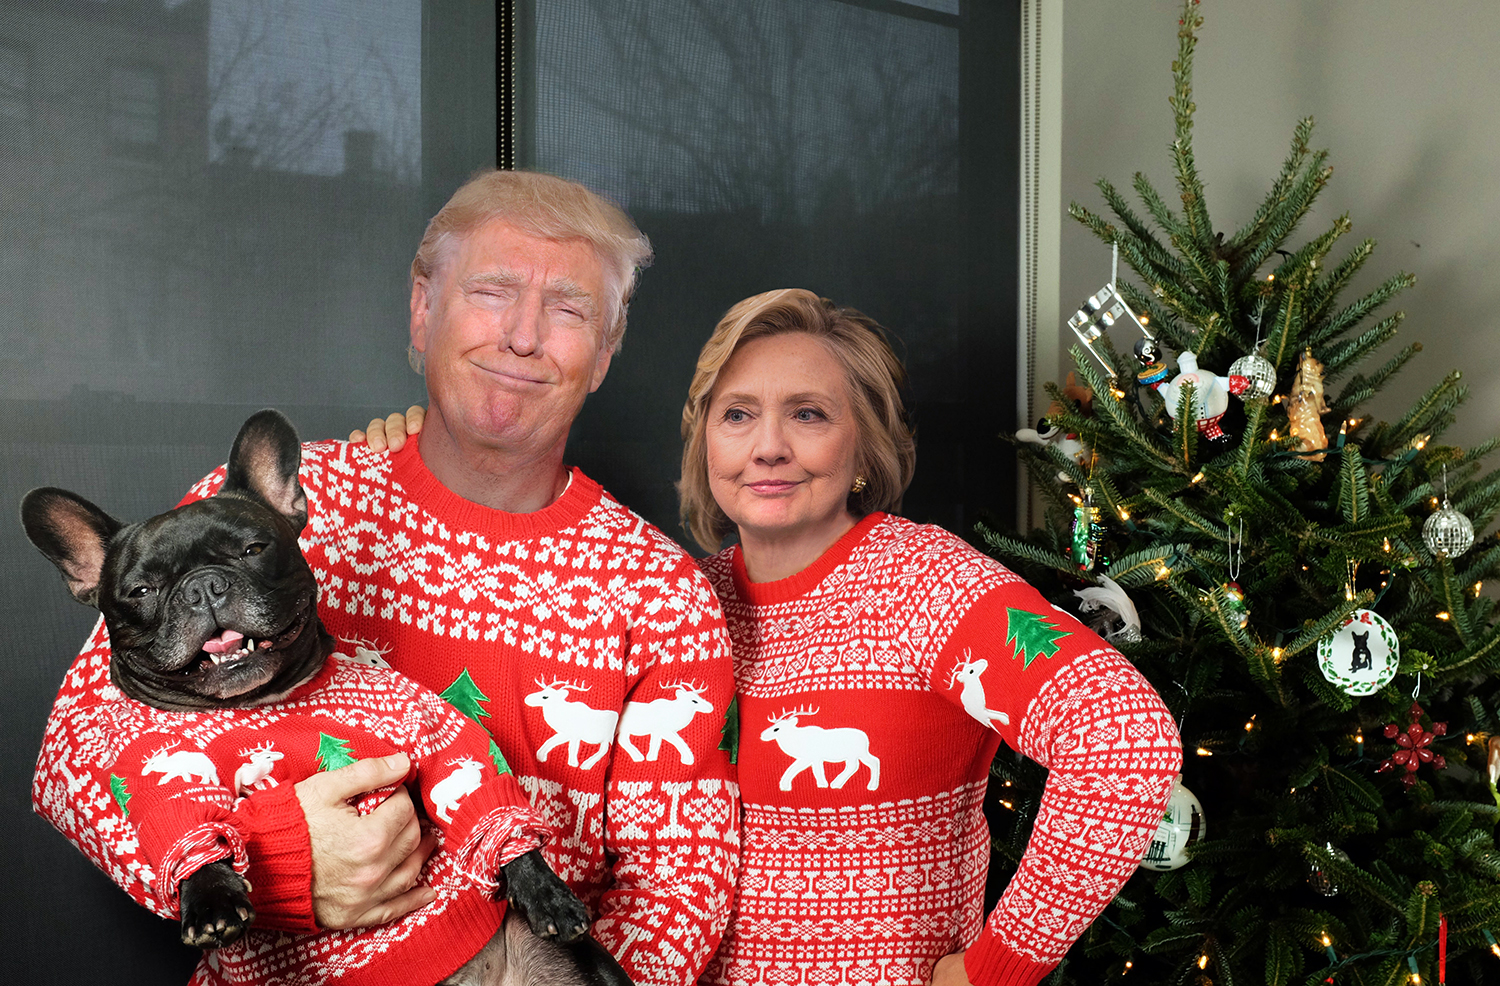 5 Brilliant Ways to Derail Political Talk During the Holidays